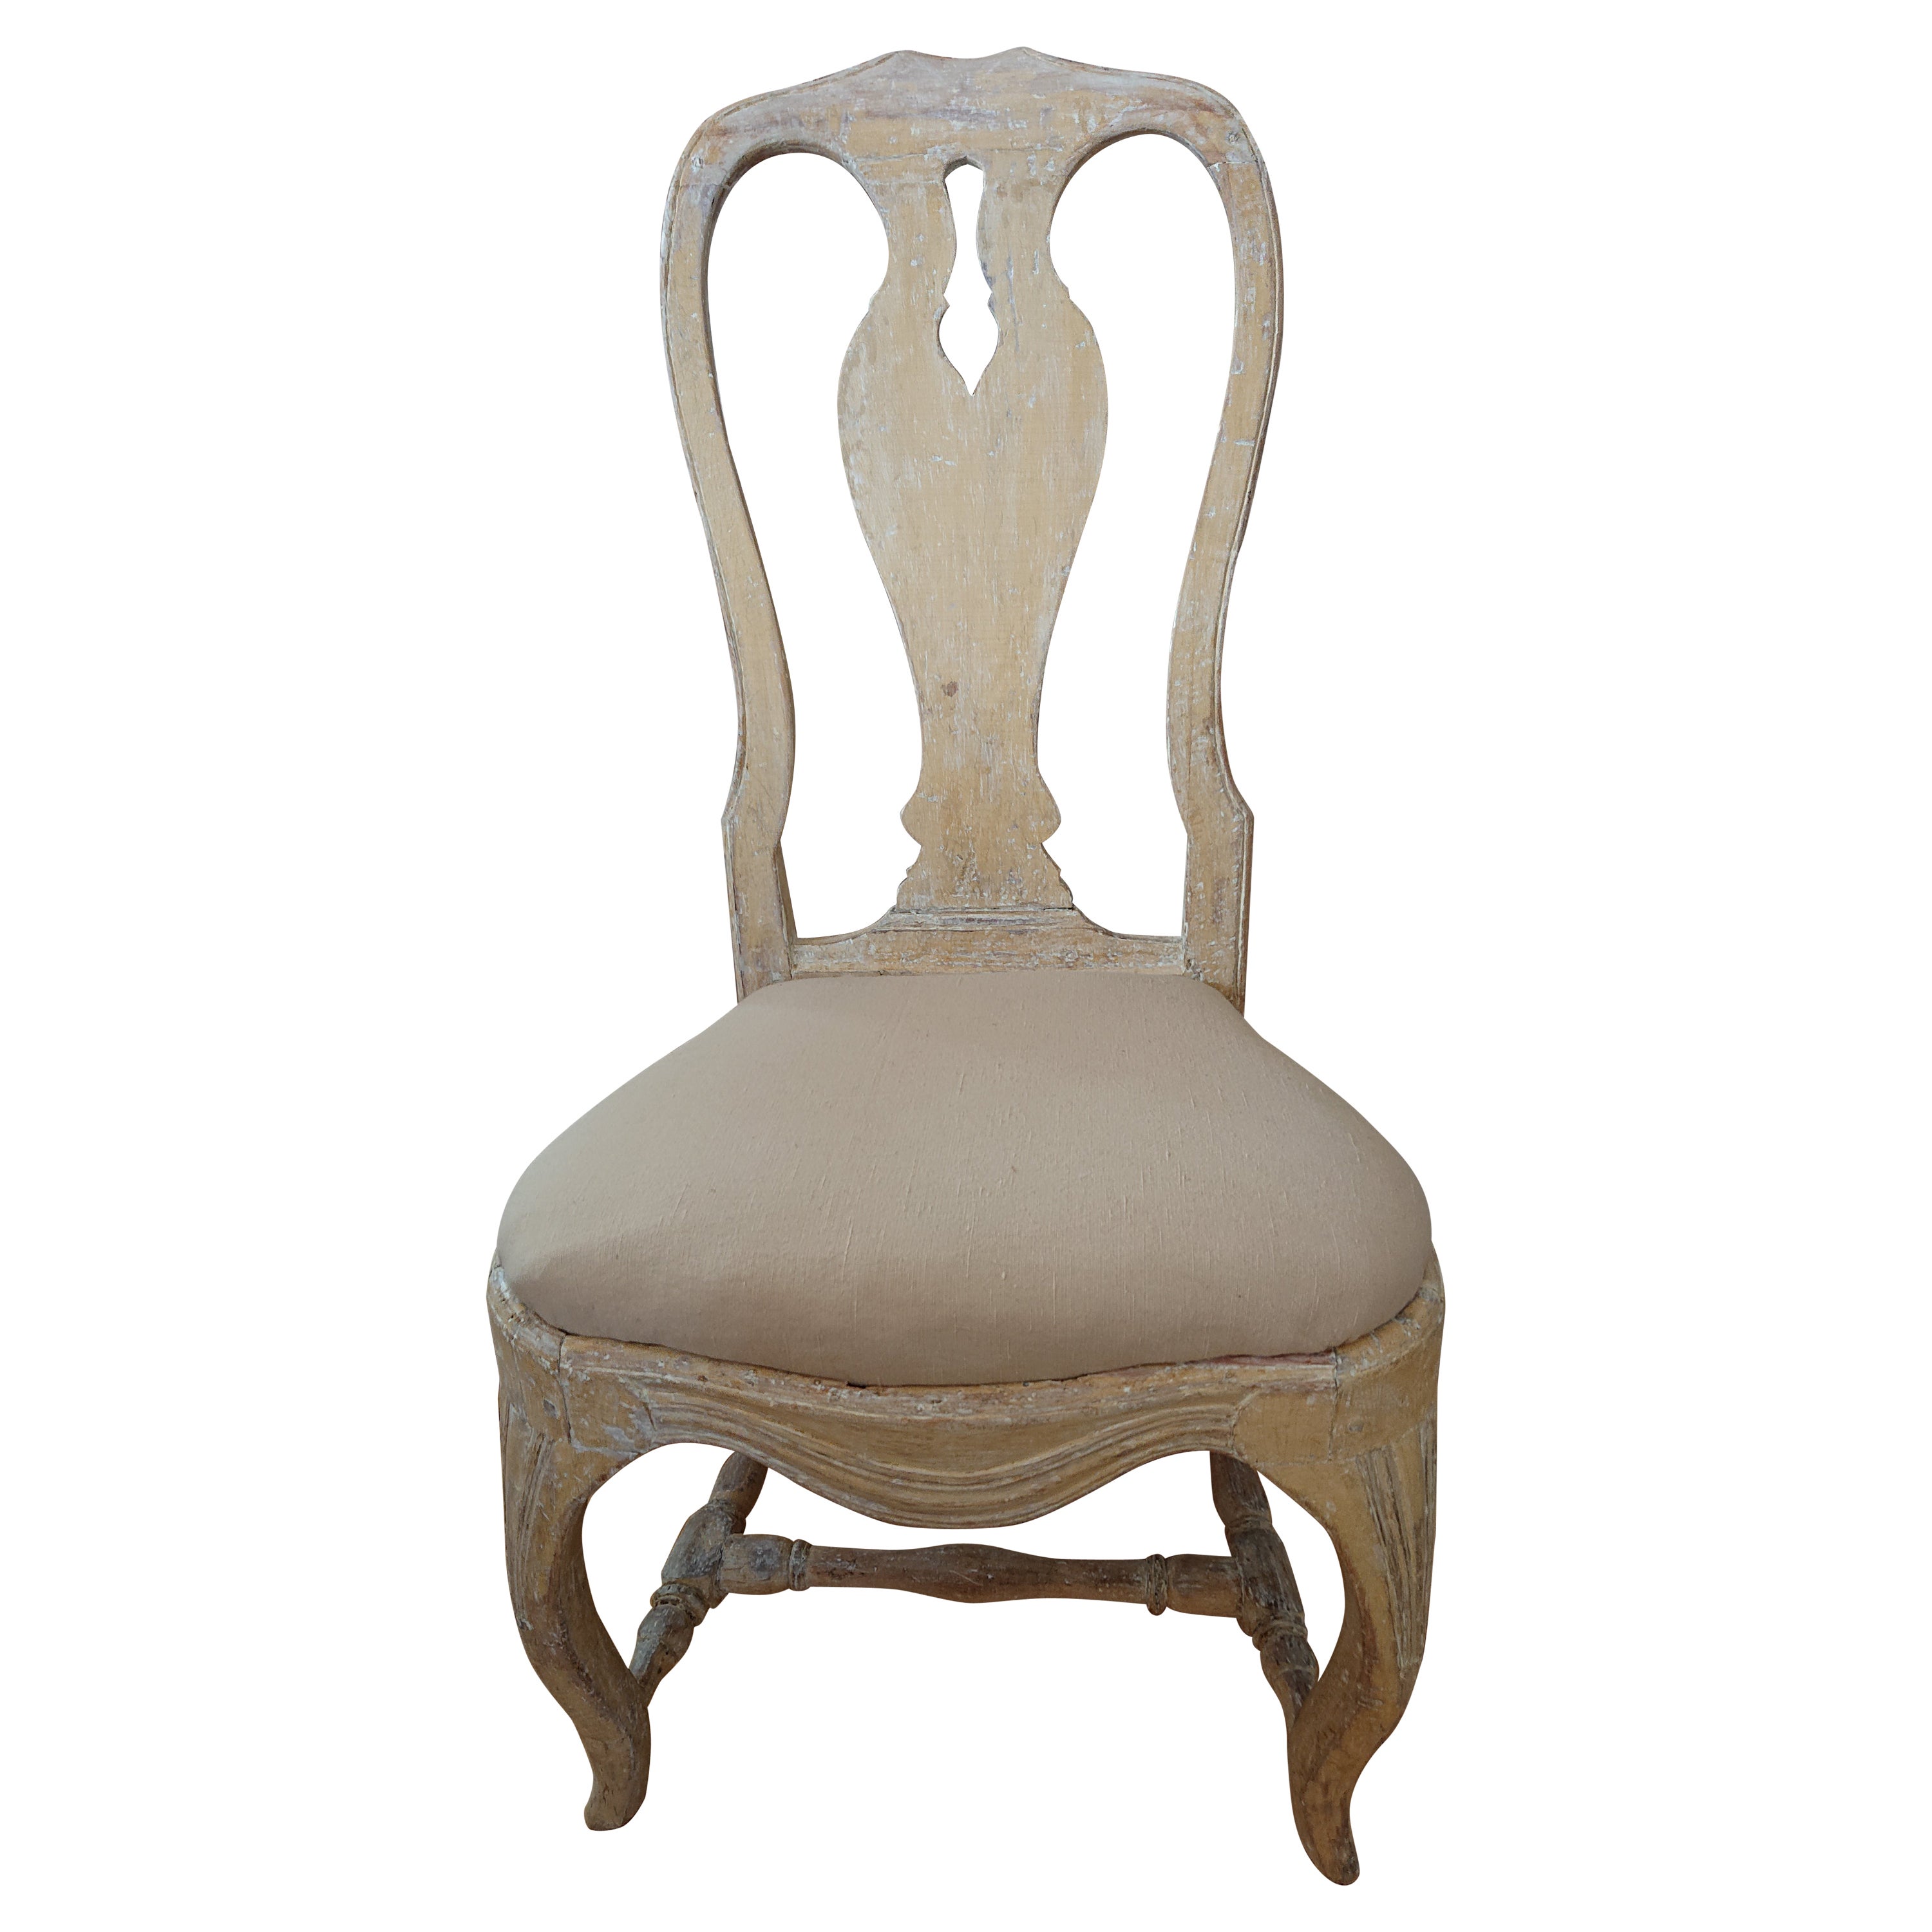 18th Century Swedish Antique Rococo Chair with Original Paint